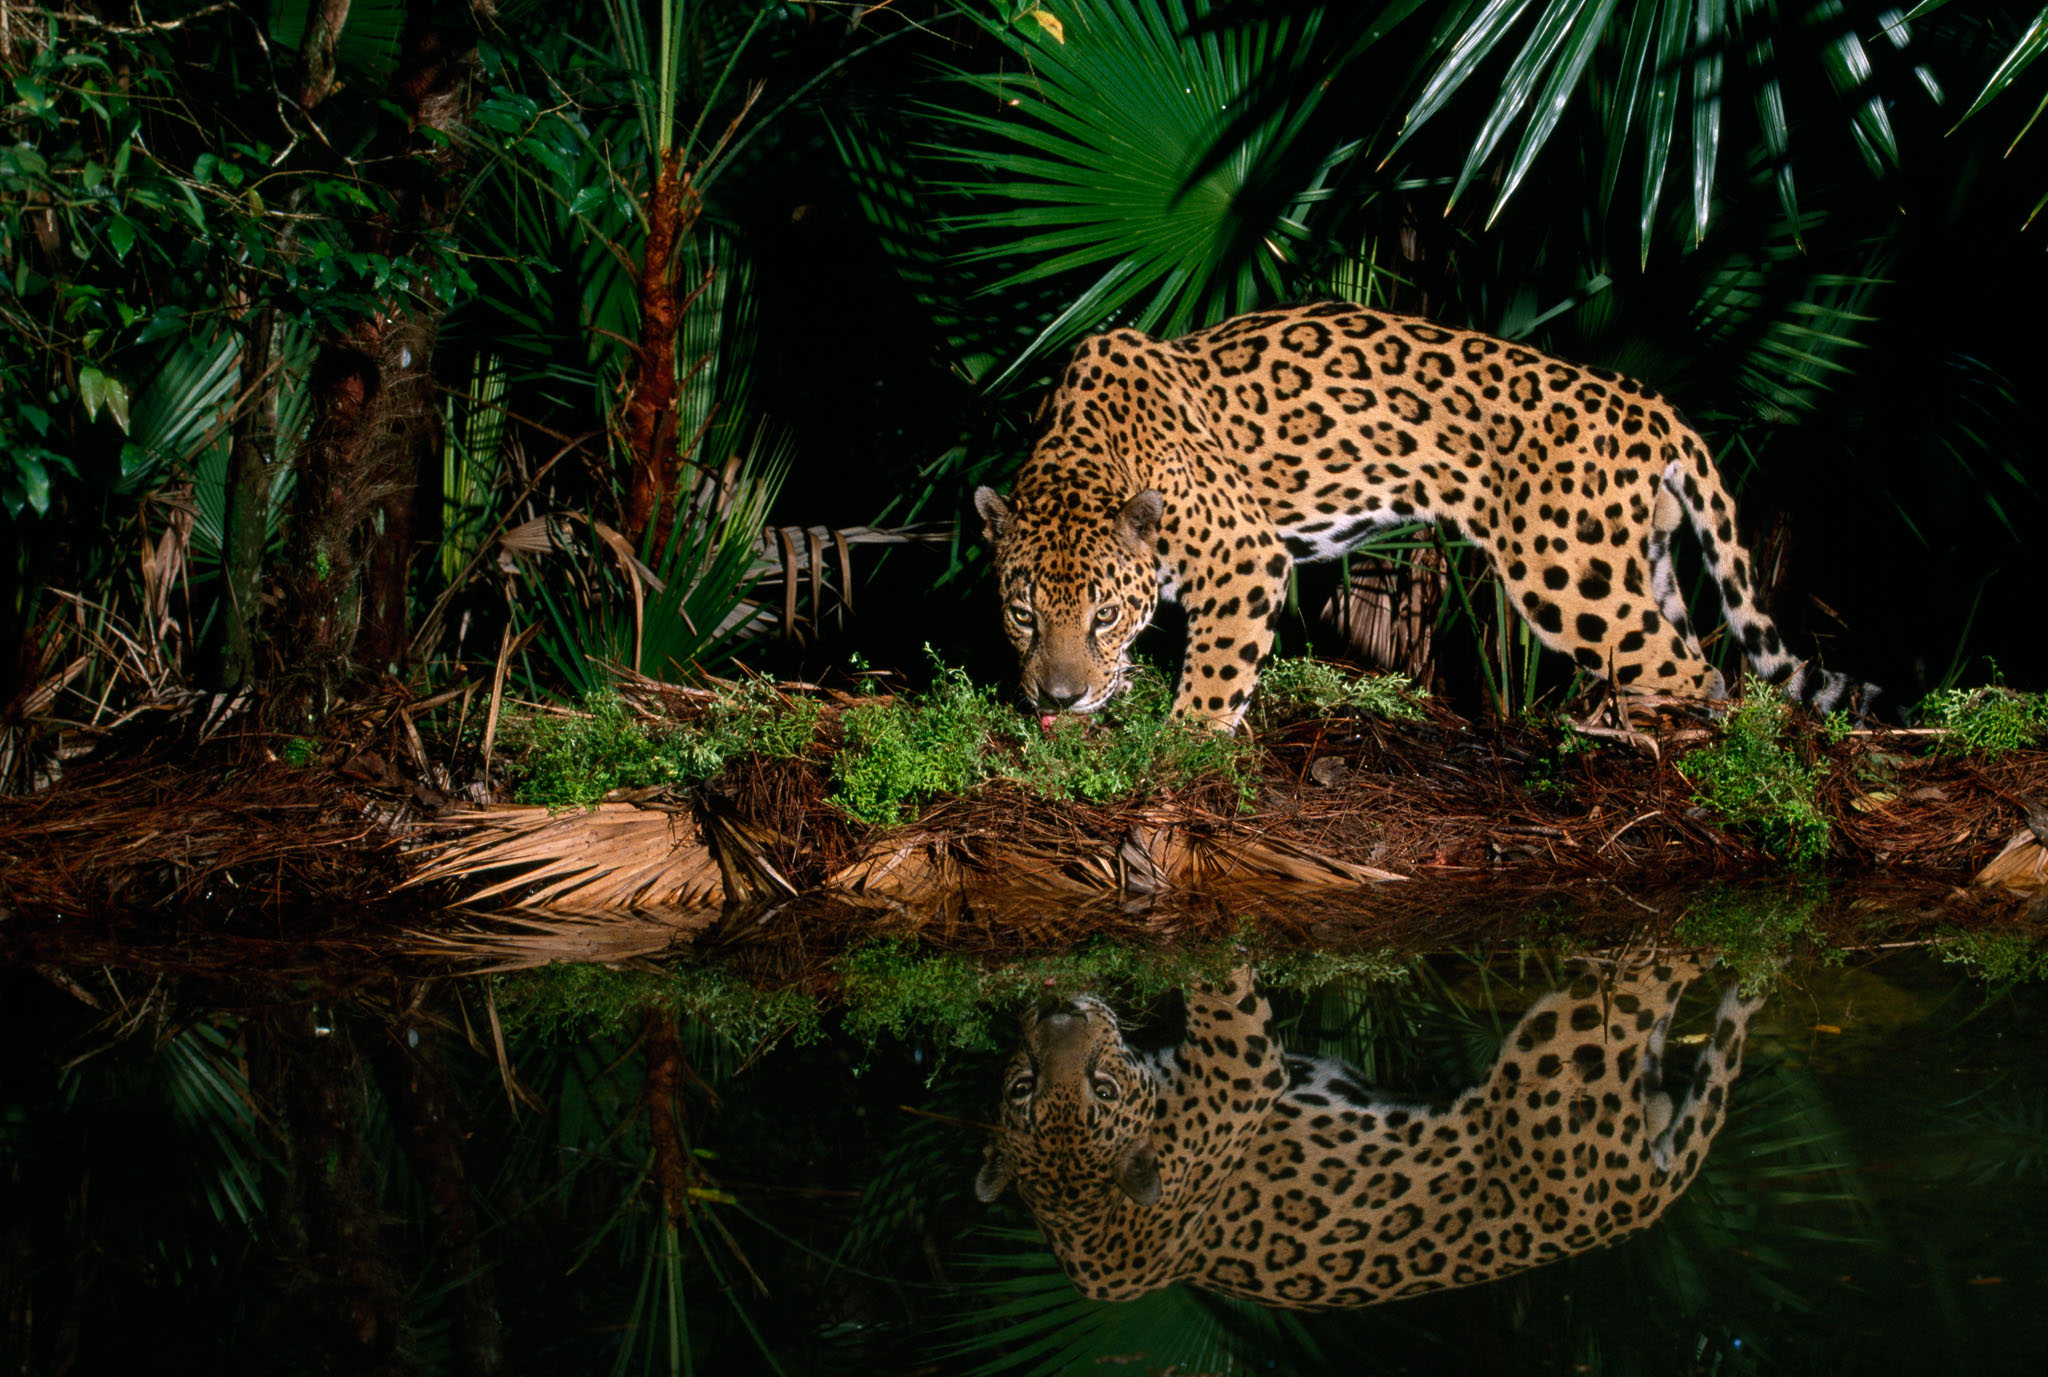 Can You Spot the Difference Between a Jaguar and a Leopard?